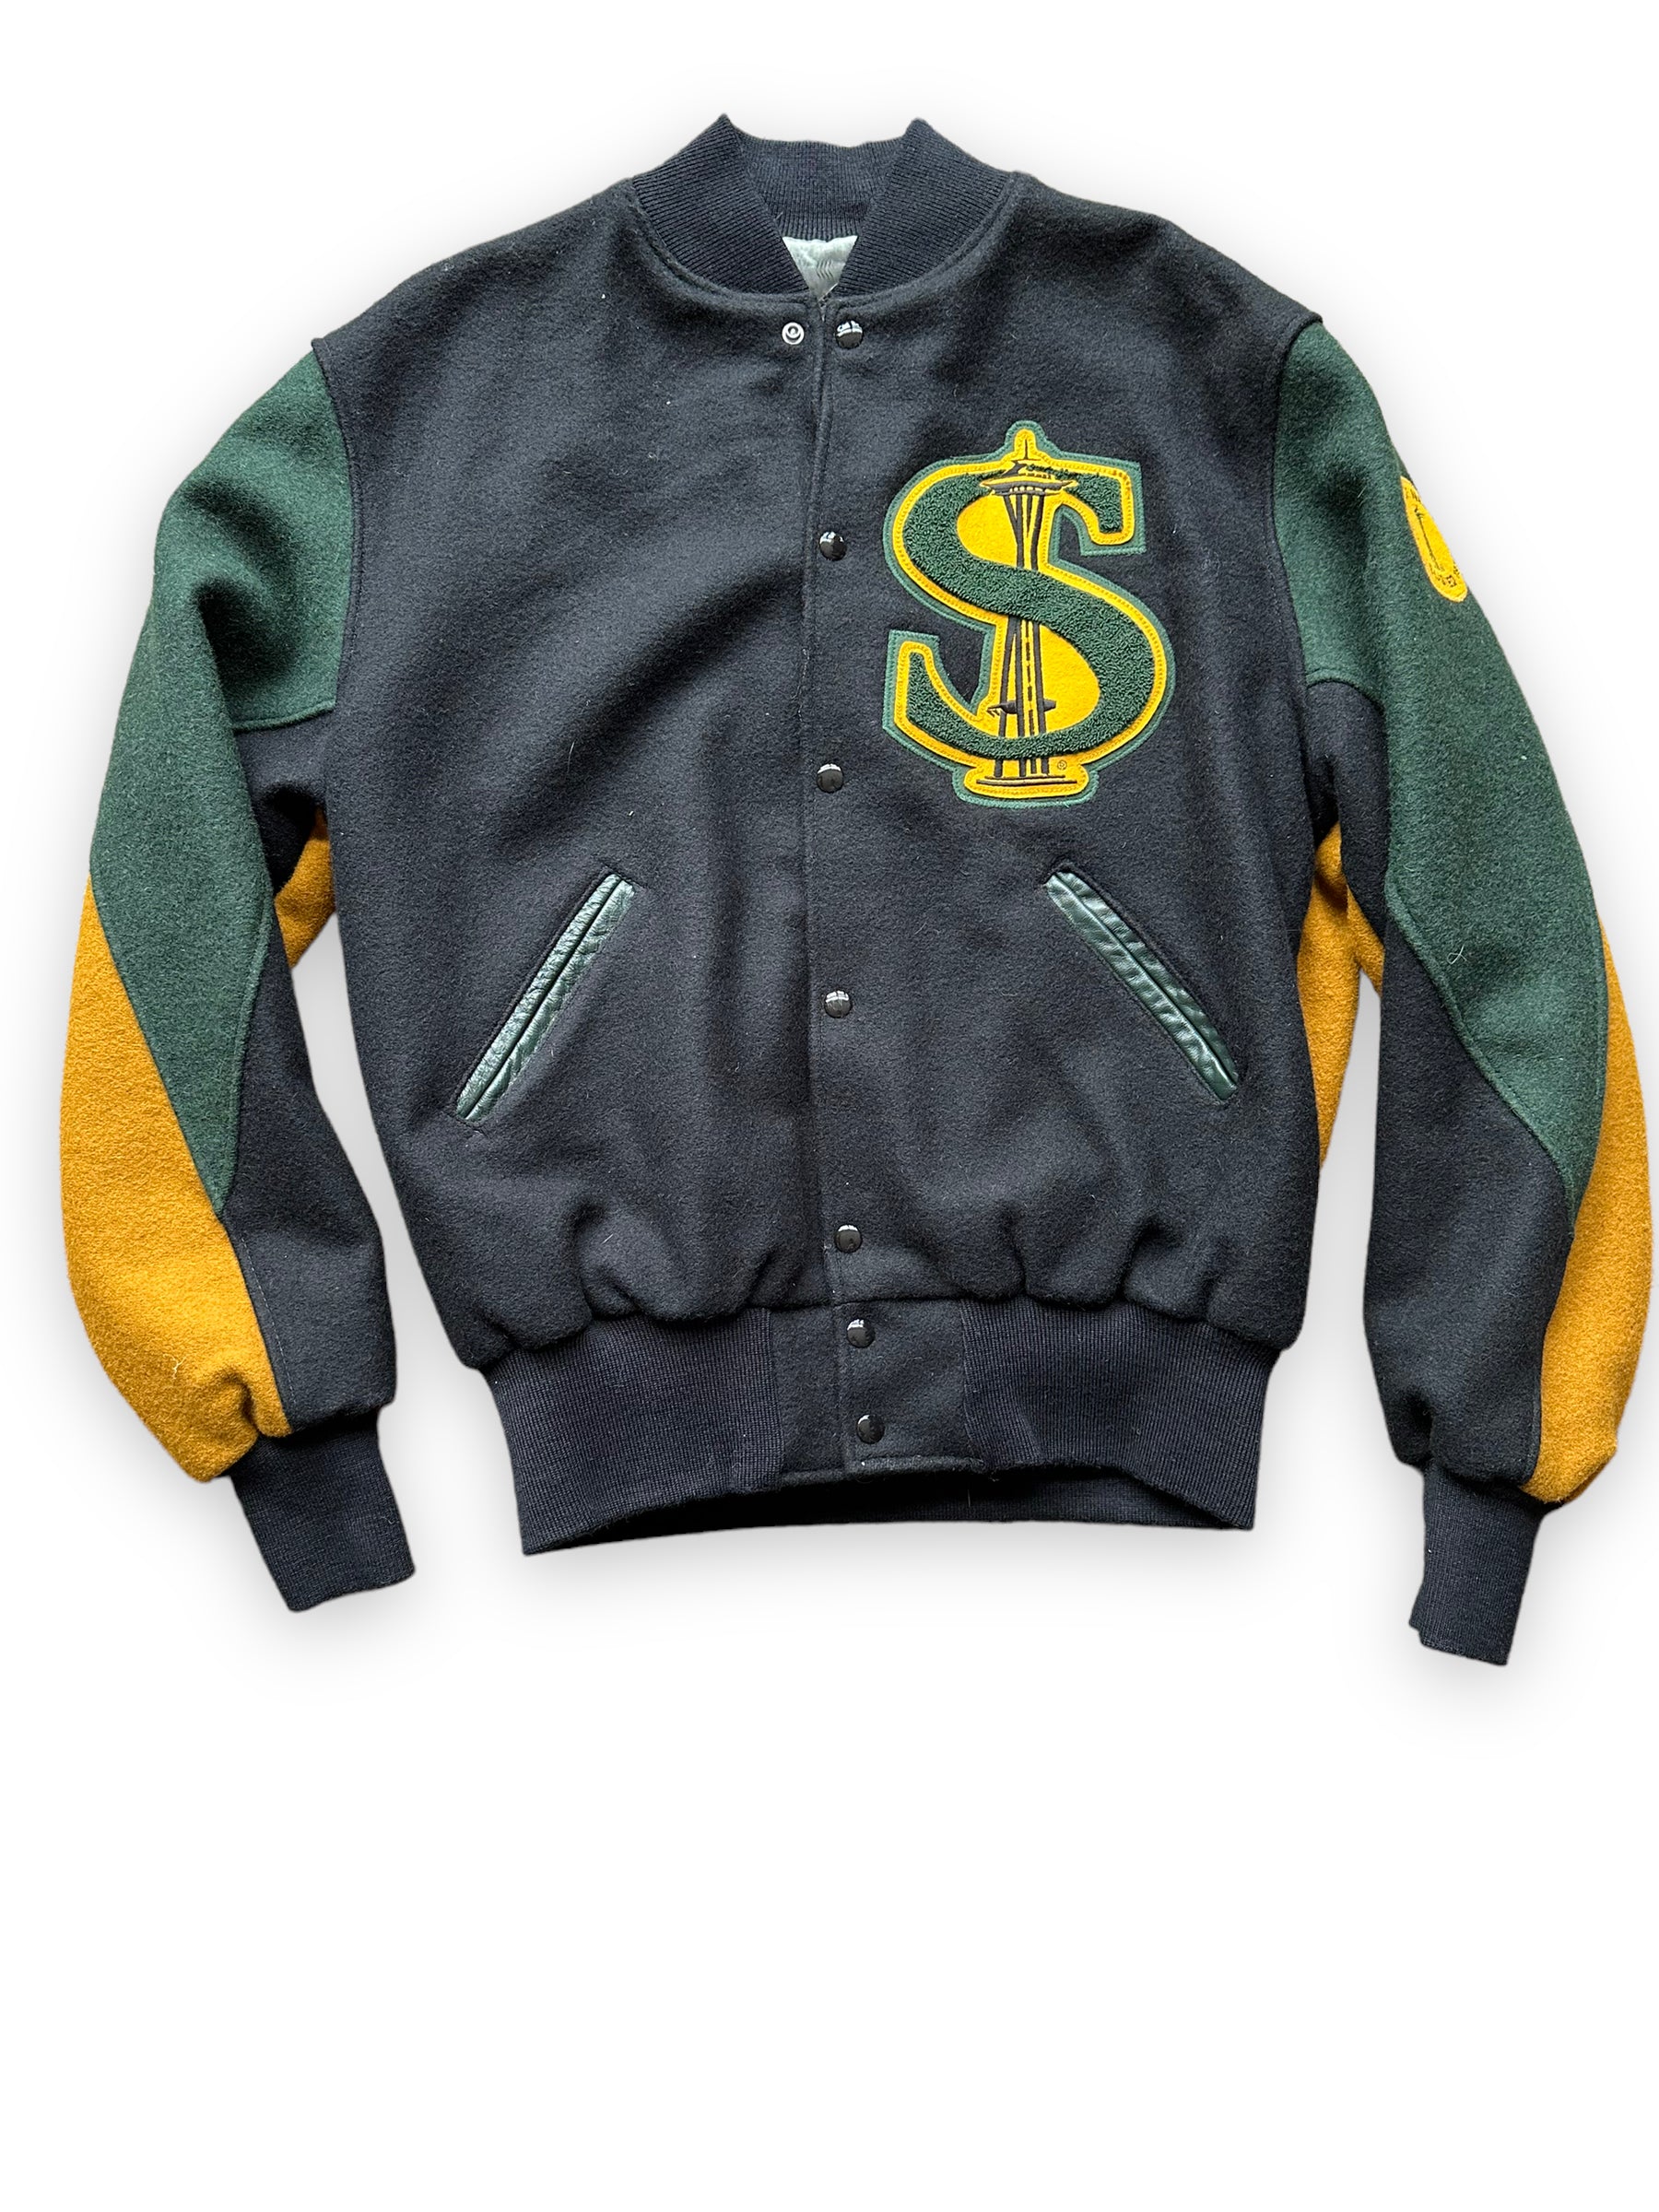 Alternate Front View of Seattle Supersonics Green Black and Yellow Prototype Jacket SZ L | Vintage Seattle Supersonics  | Seattle Vintage Basketball